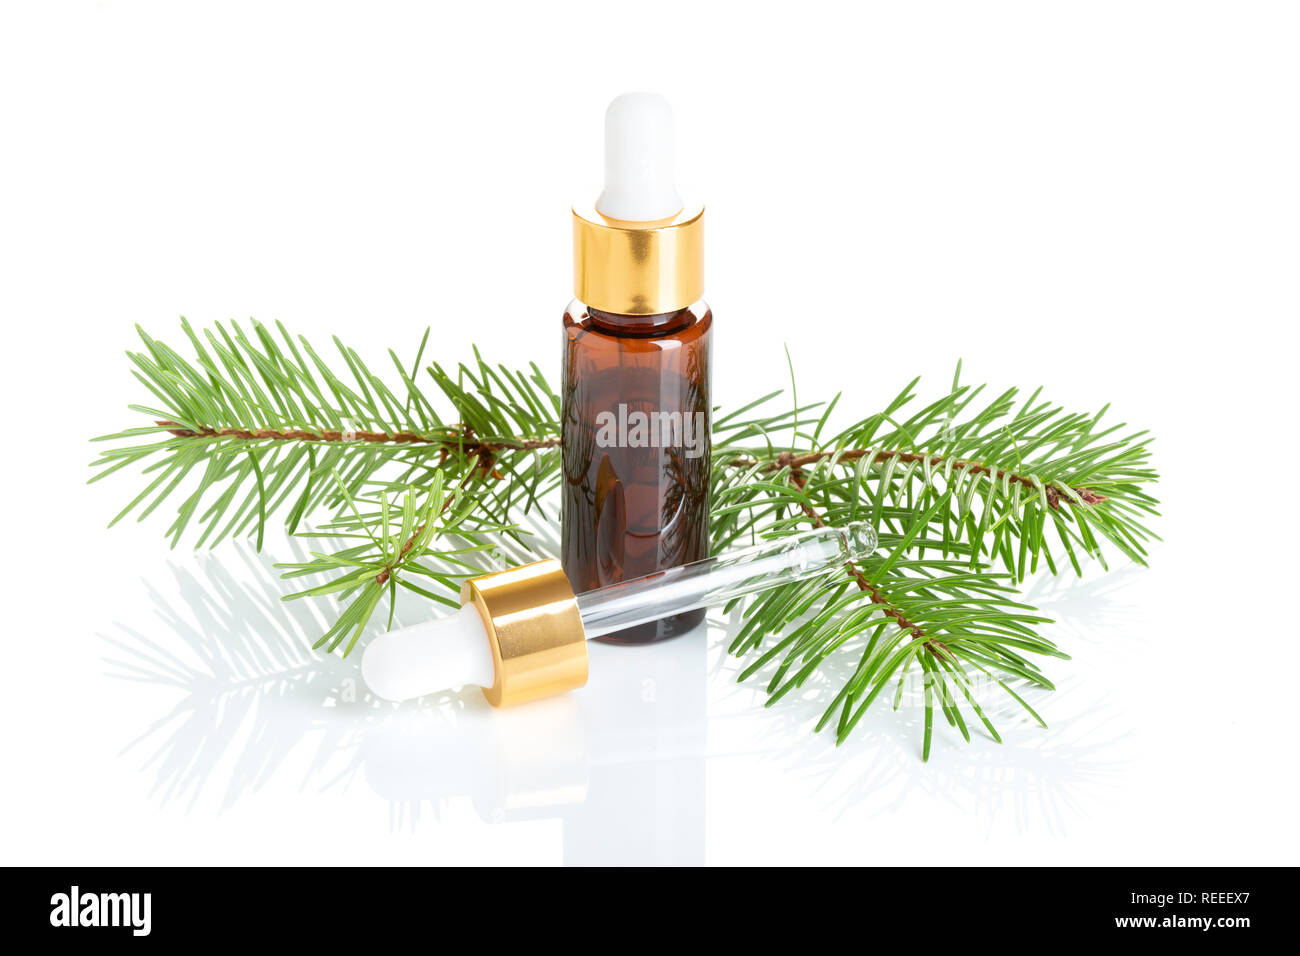 Pine essential oil isolated on white background. Pine oil bottle with dropper for beauty, skin care, wellness. Natural remedies Stock Photo